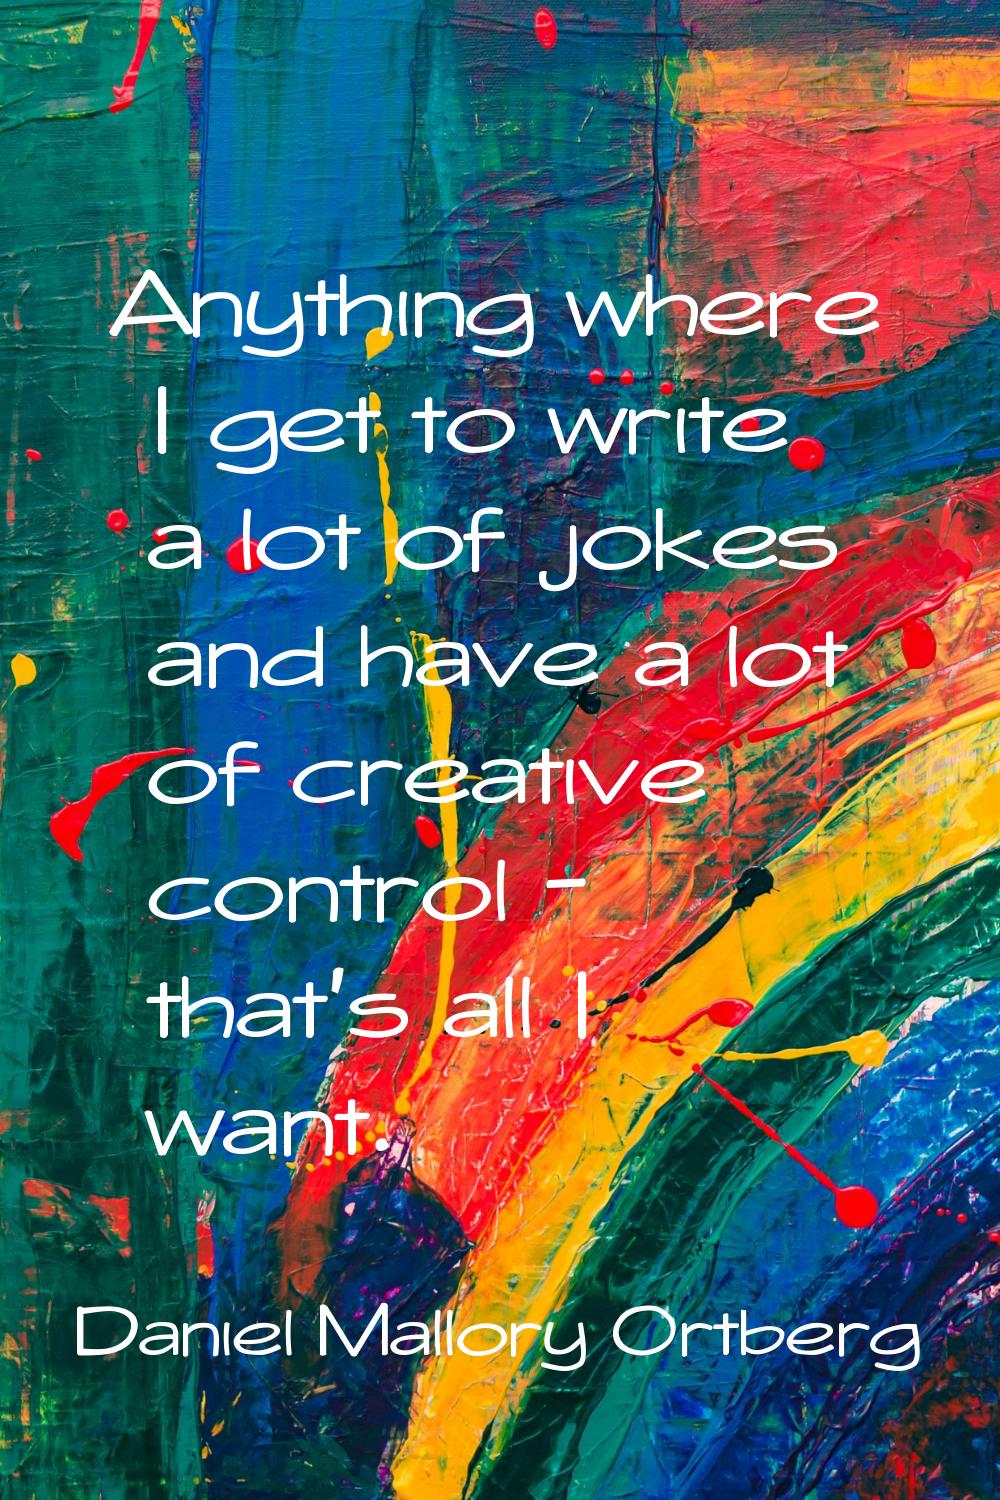 Anything where I get to write a lot of jokes and have a lot of creative control - that's all I want